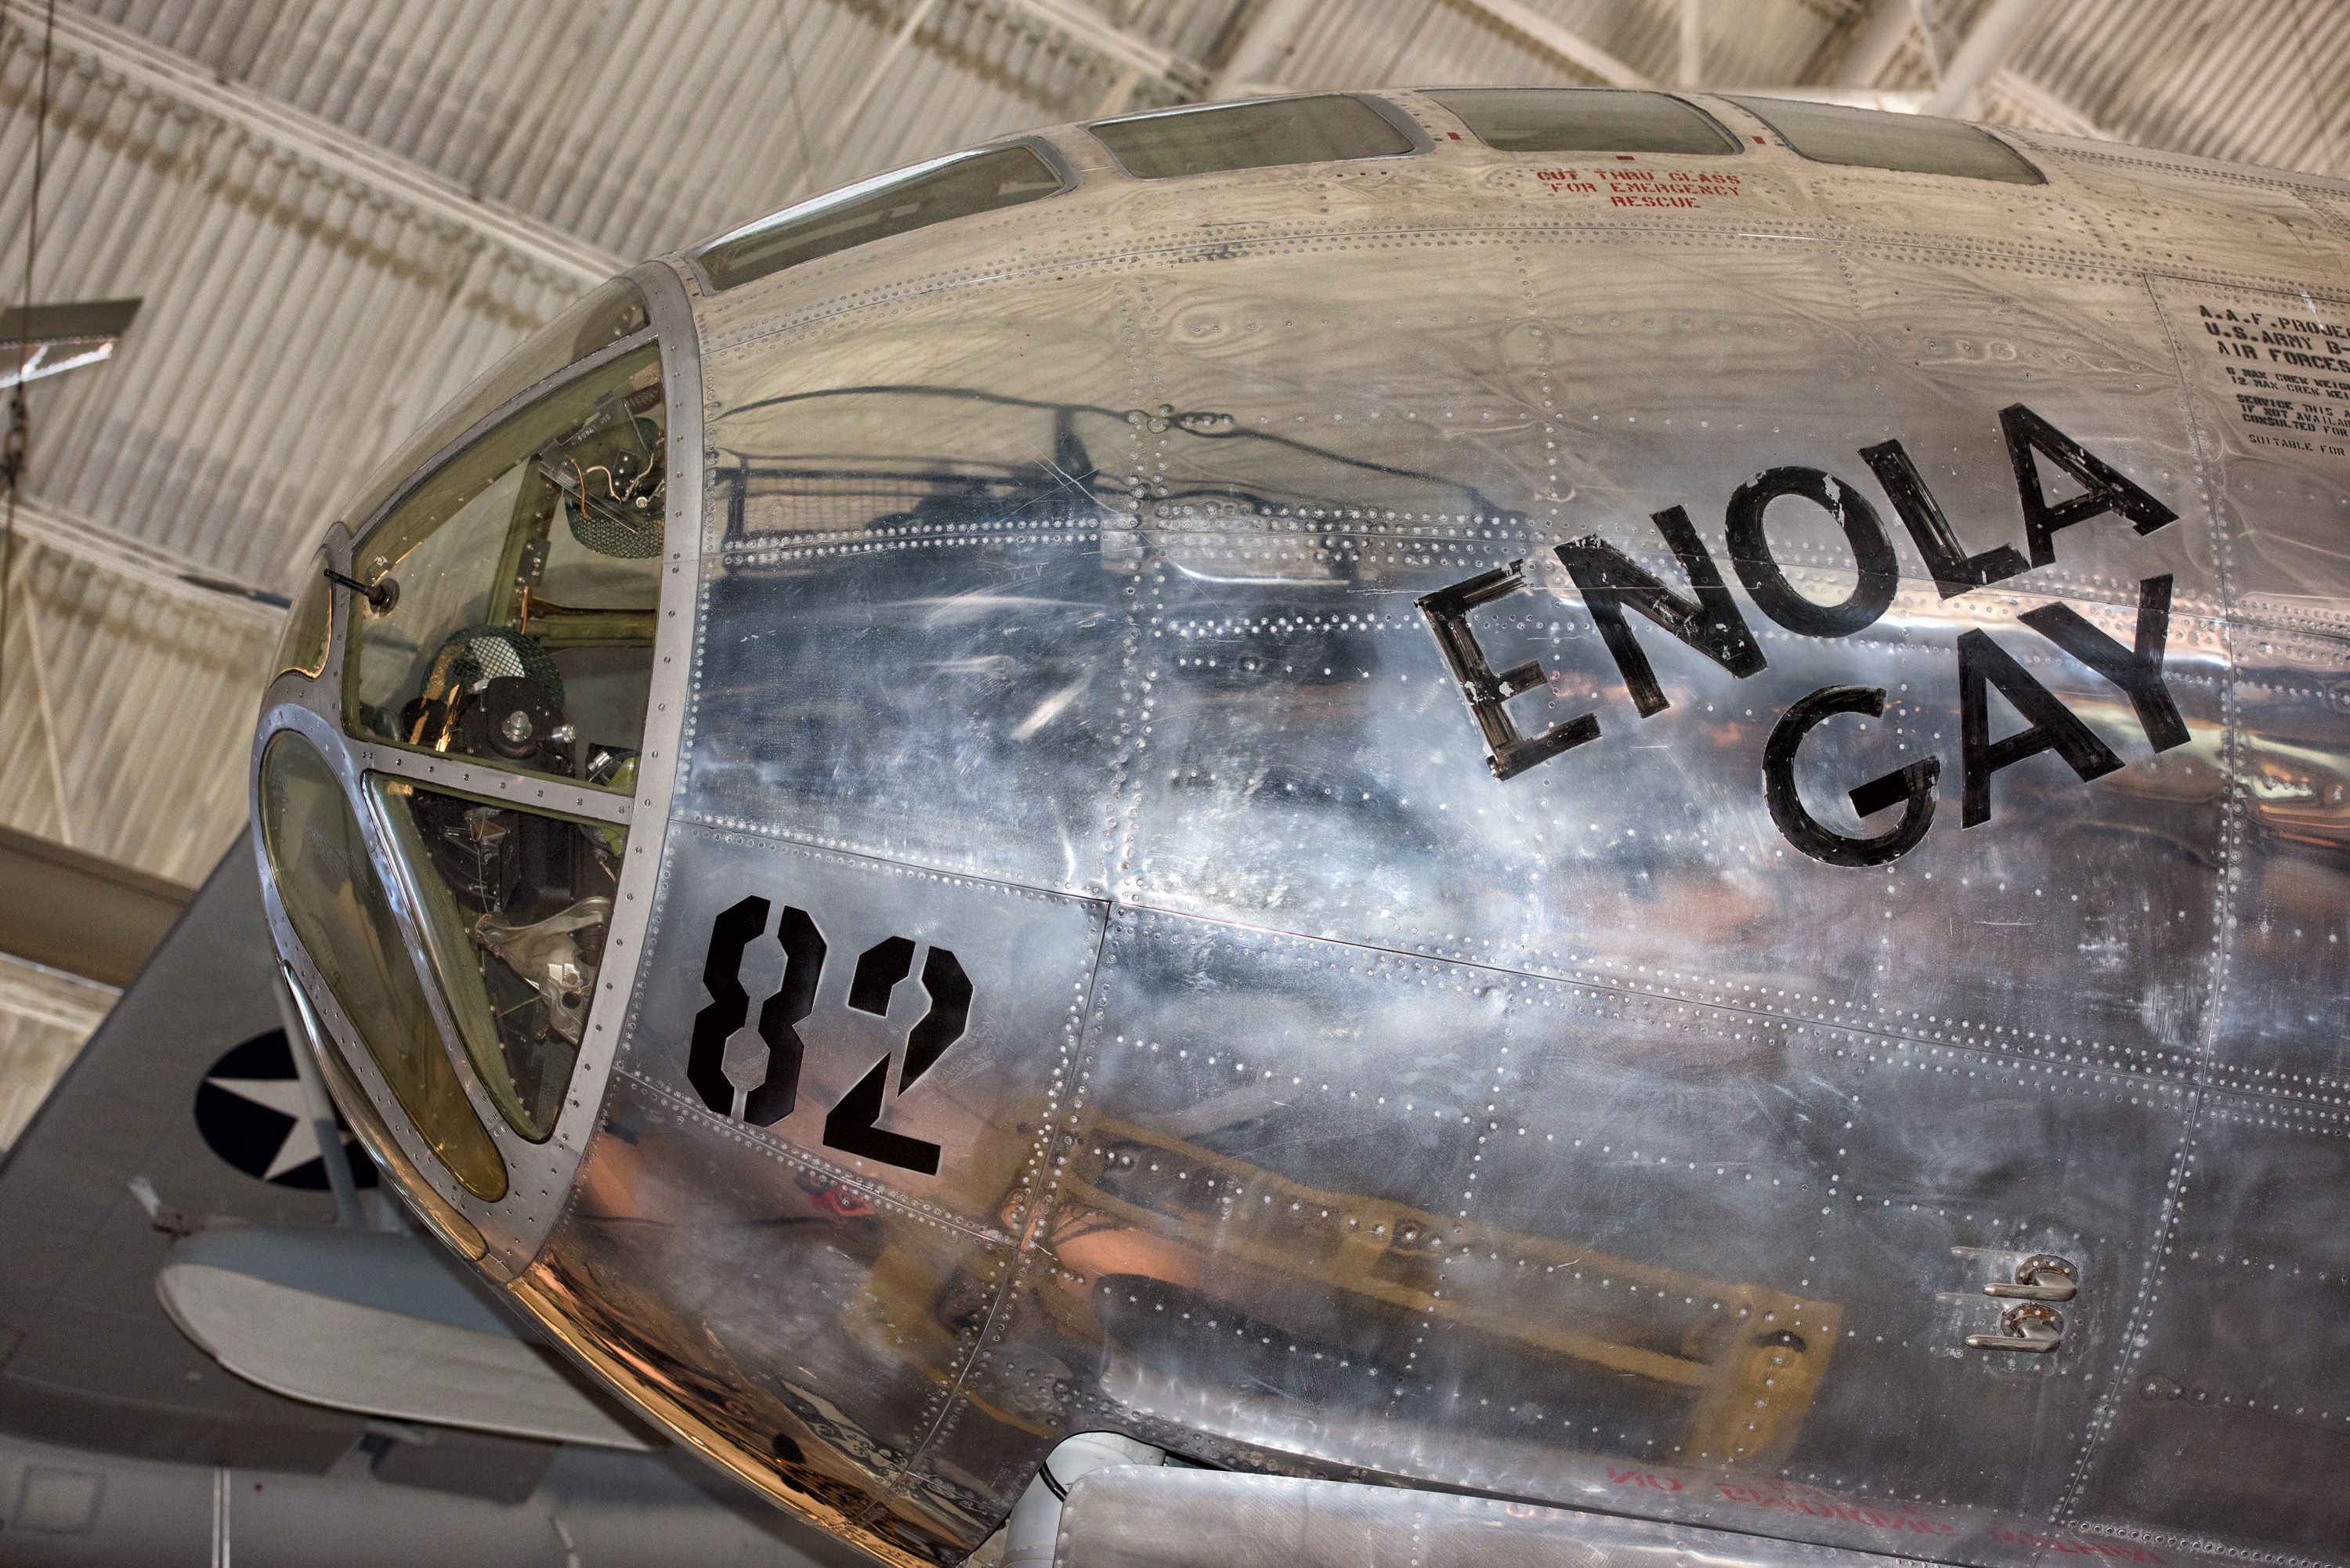 A closeup of the cockpit of the Boeing B-29 Superfortress Enola Gay at a museum.